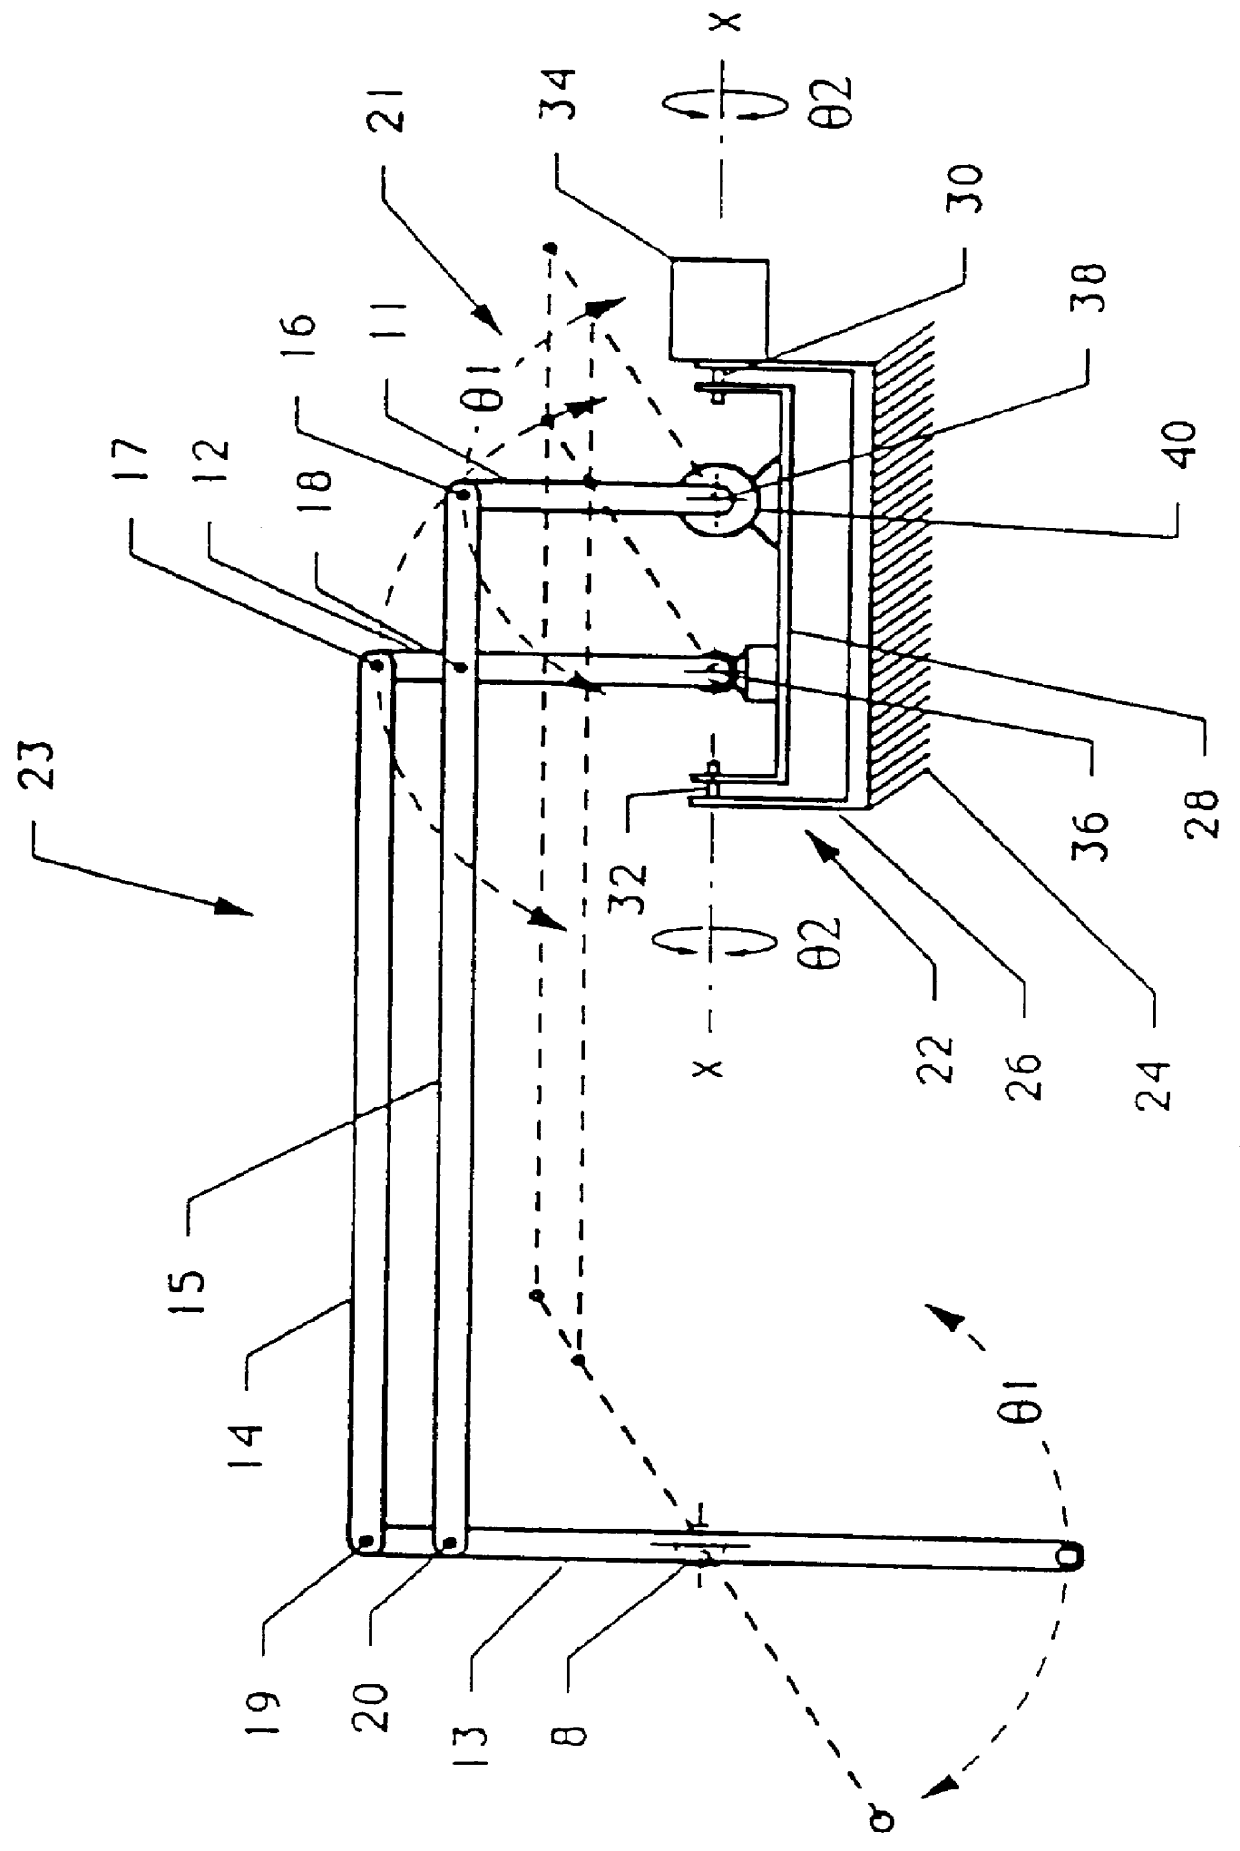 Methods and devices for positioning a surgical instrument at a surgical site